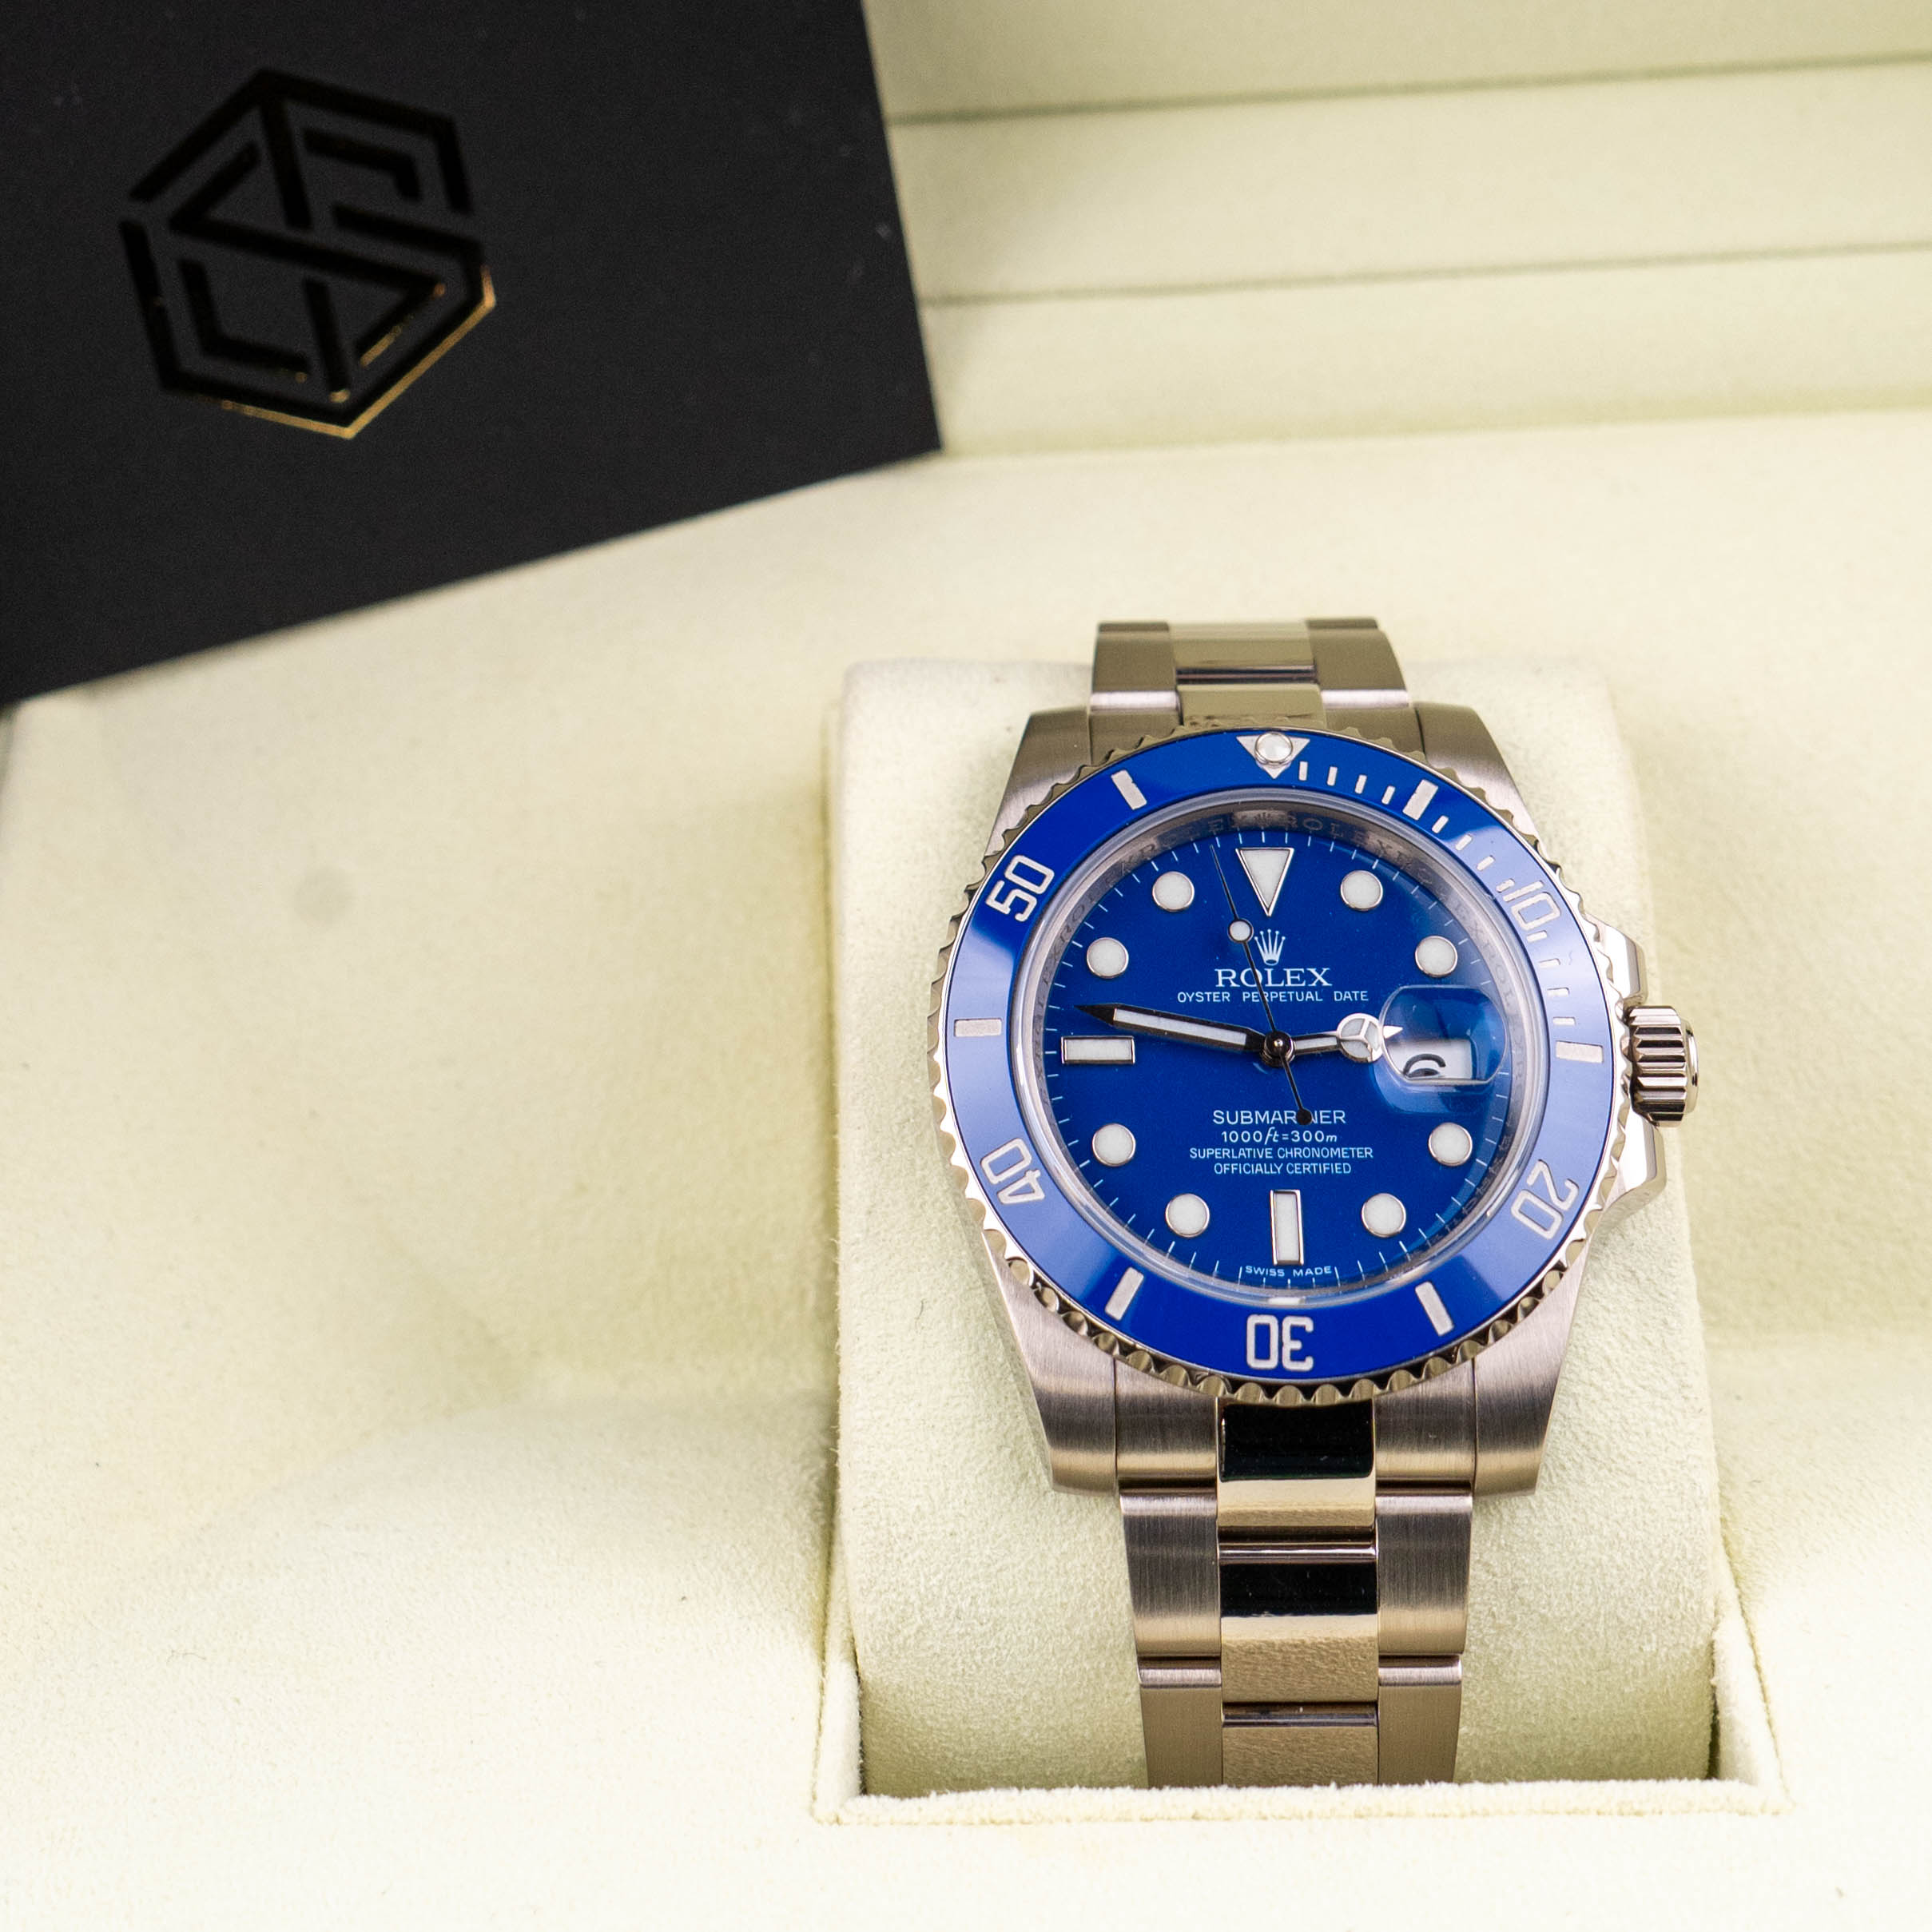 Rolex Submariner Smurf Date 18K White Gold Blue Dial Mens Watch 116619 –  11:11 NY